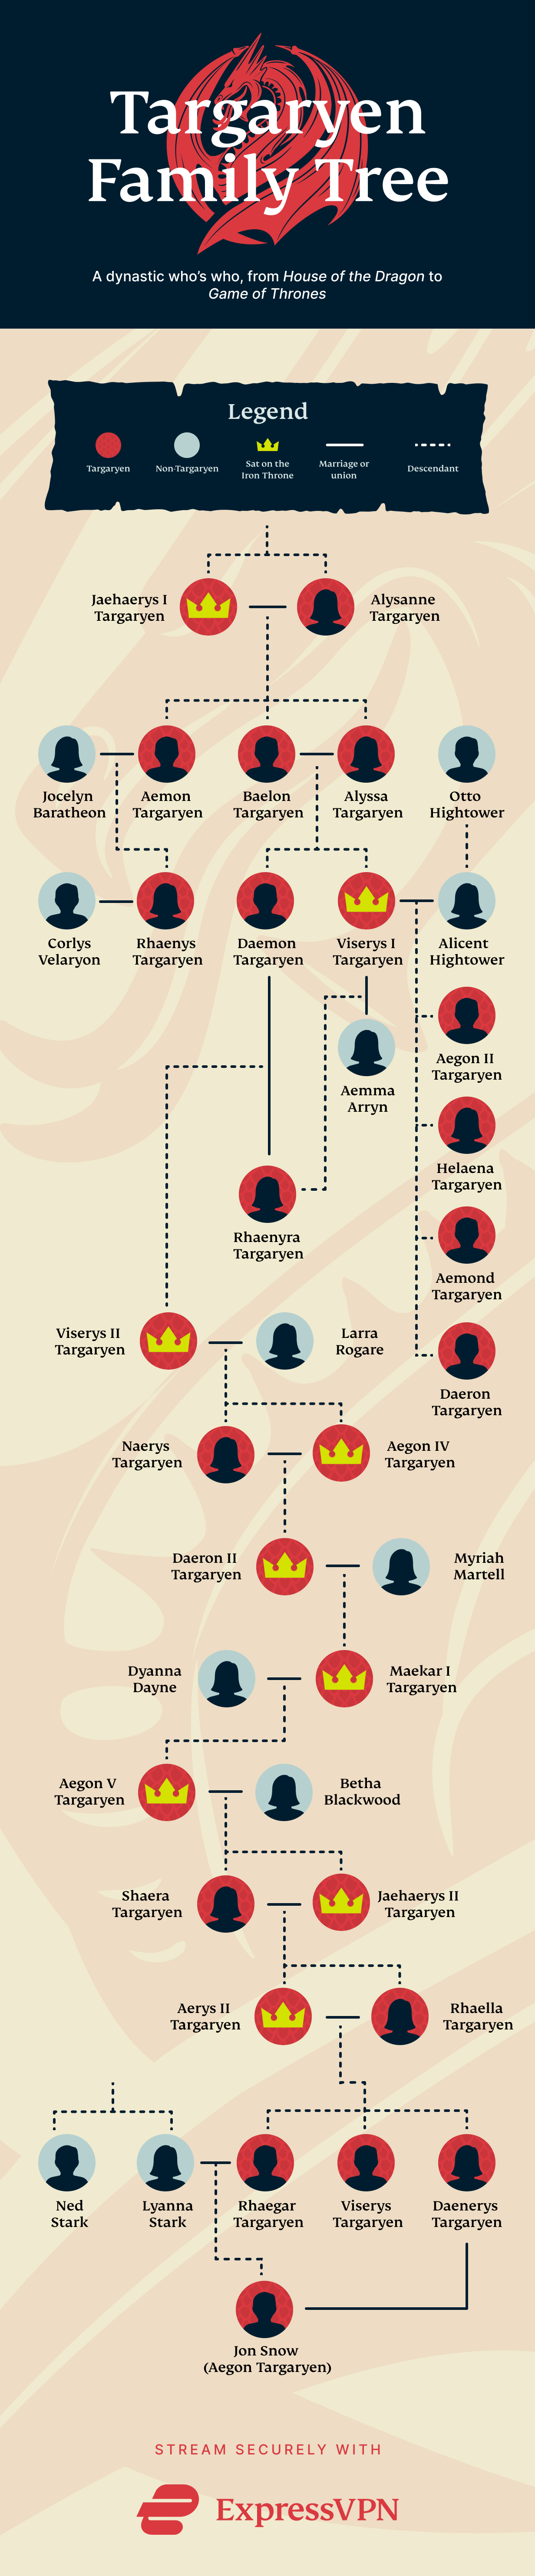 Targaryen family tree from House of the Dragon to Game of Thrones.